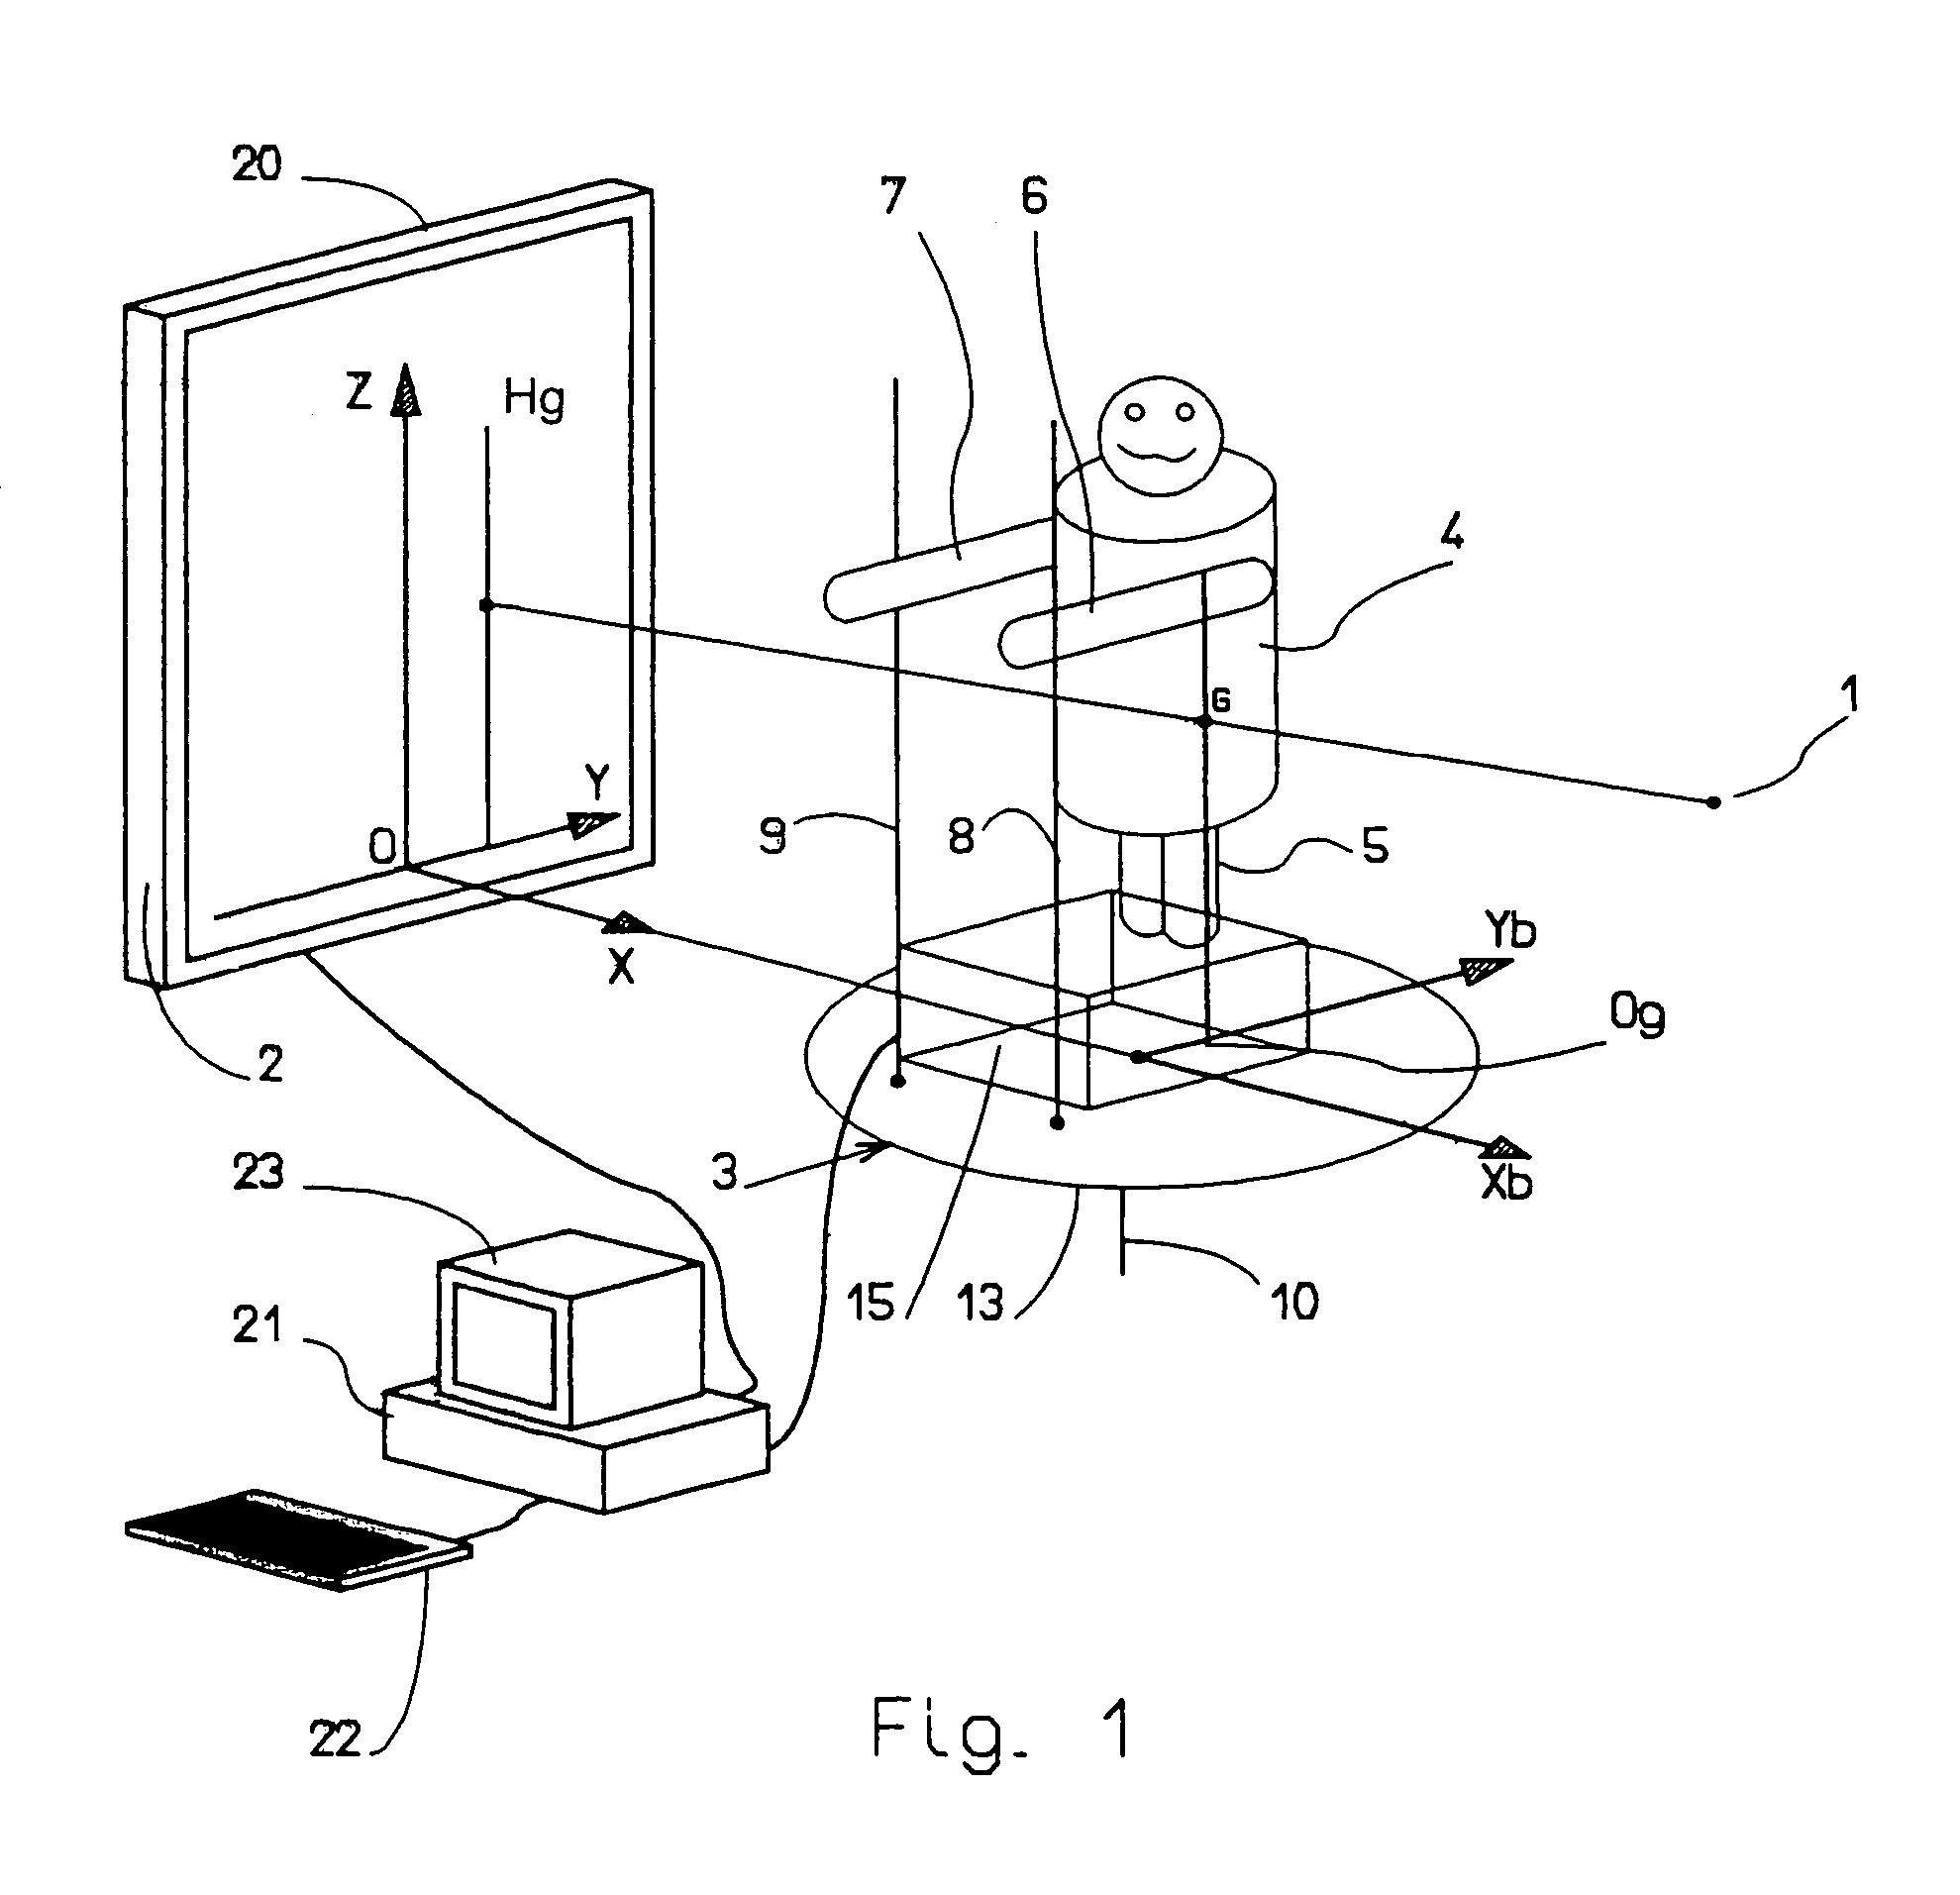 Device for evaluating a position of balance for the human body